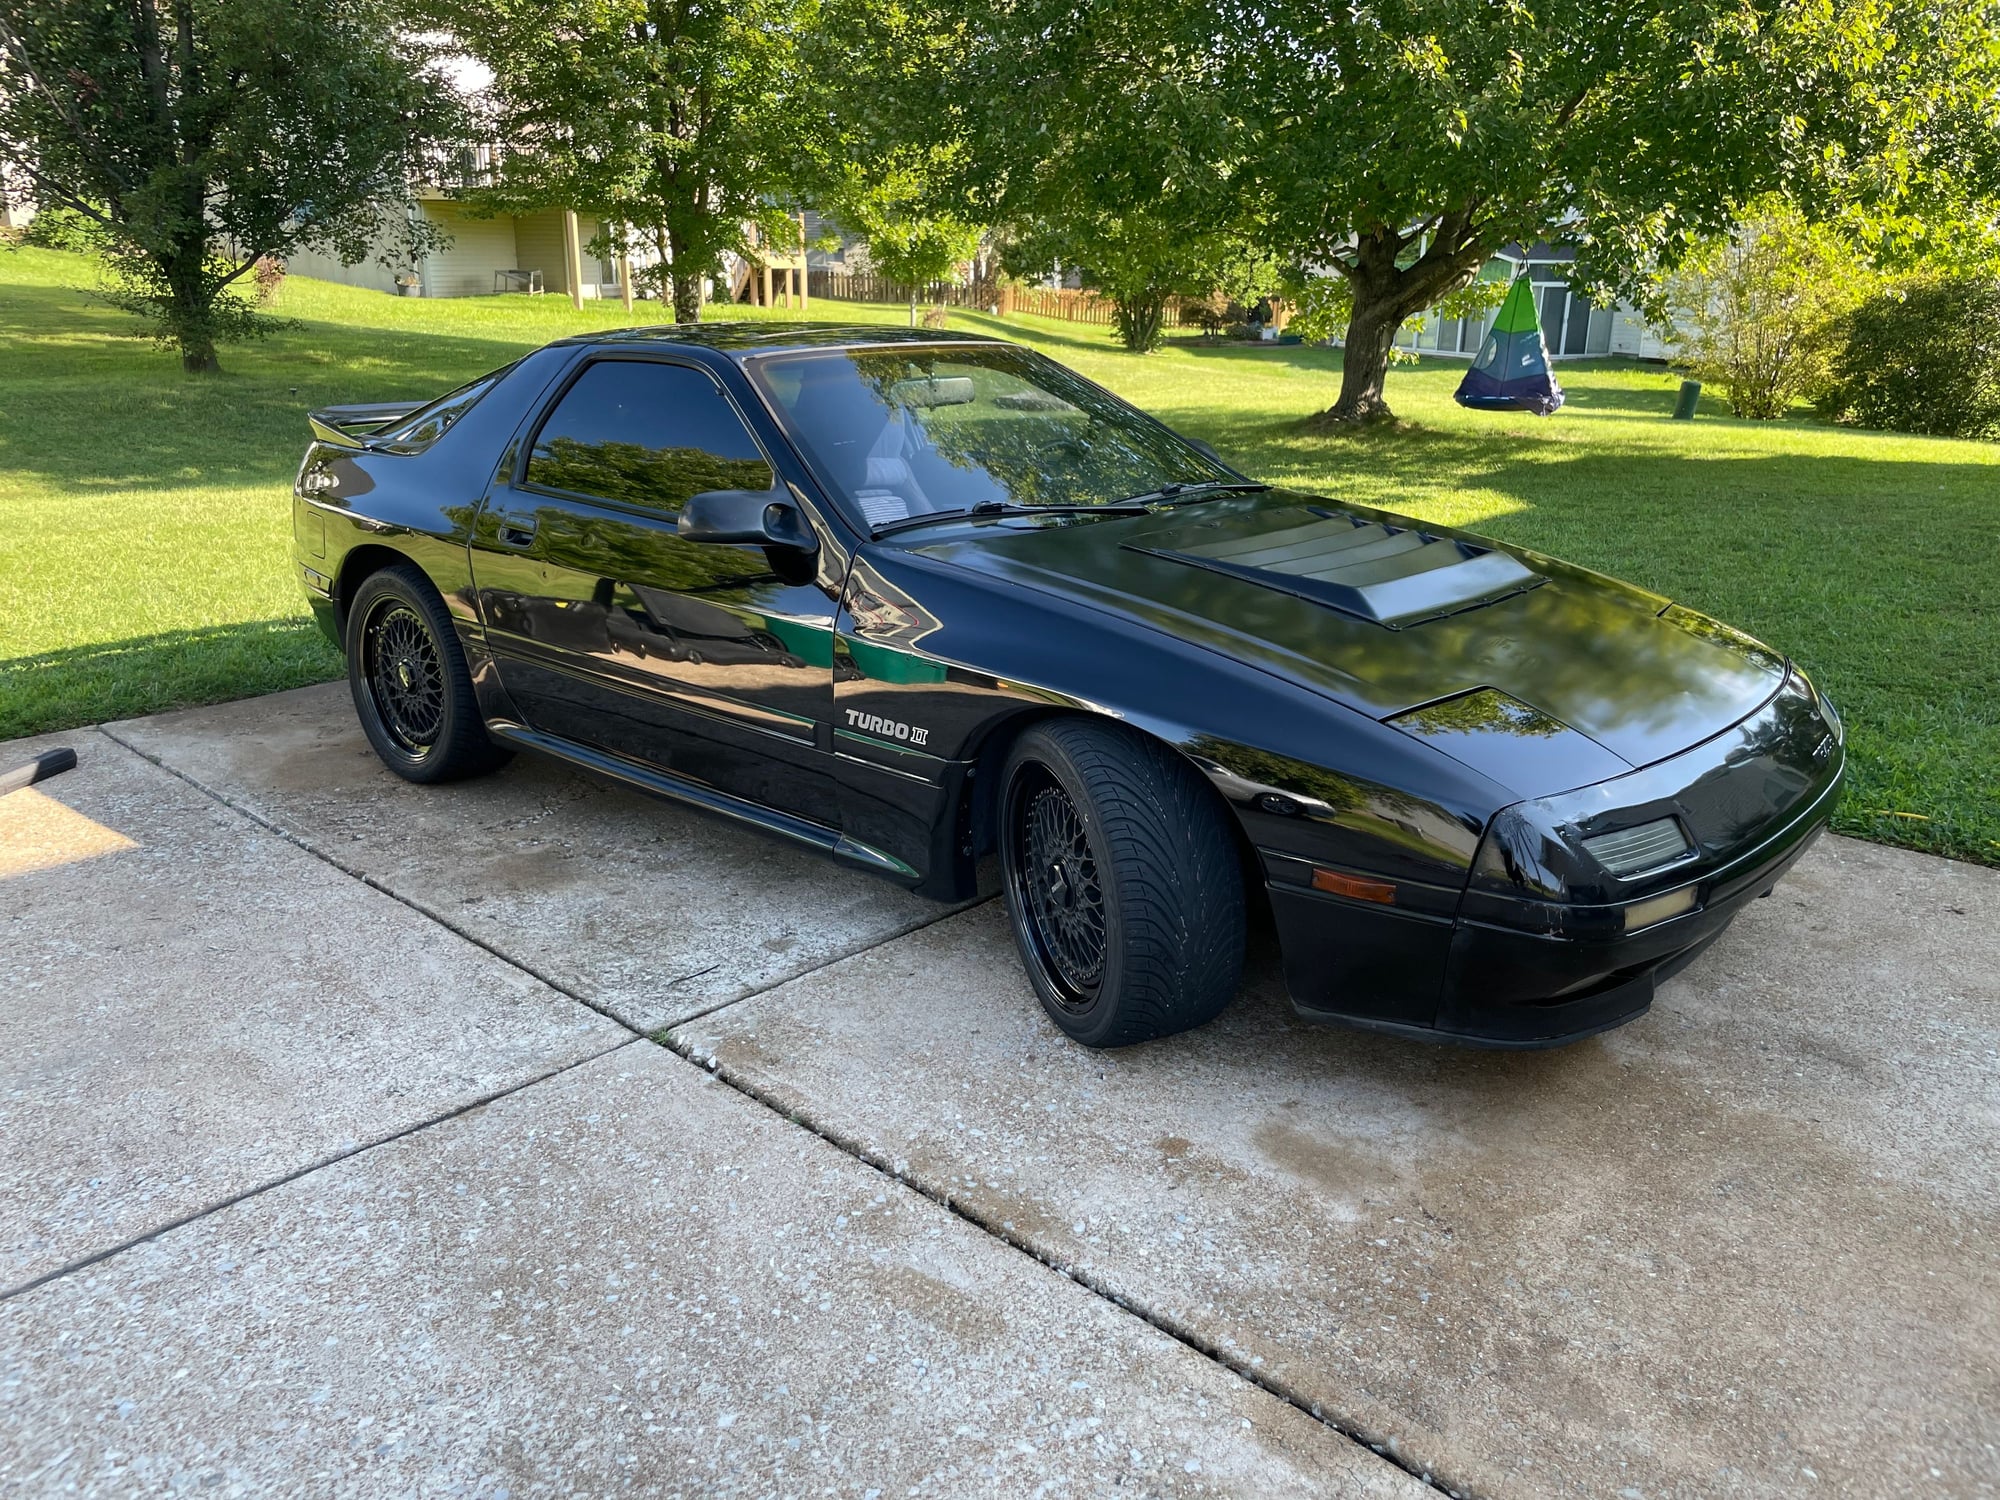 1989 Mazda RX-7 - 1989 S5 Black T2 - Used - VIN JM1FC3325K0705945 - 116,000 Miles - Other - 2WD - Manual - Coupe - Black - Saint Louis, MO 63114, United States